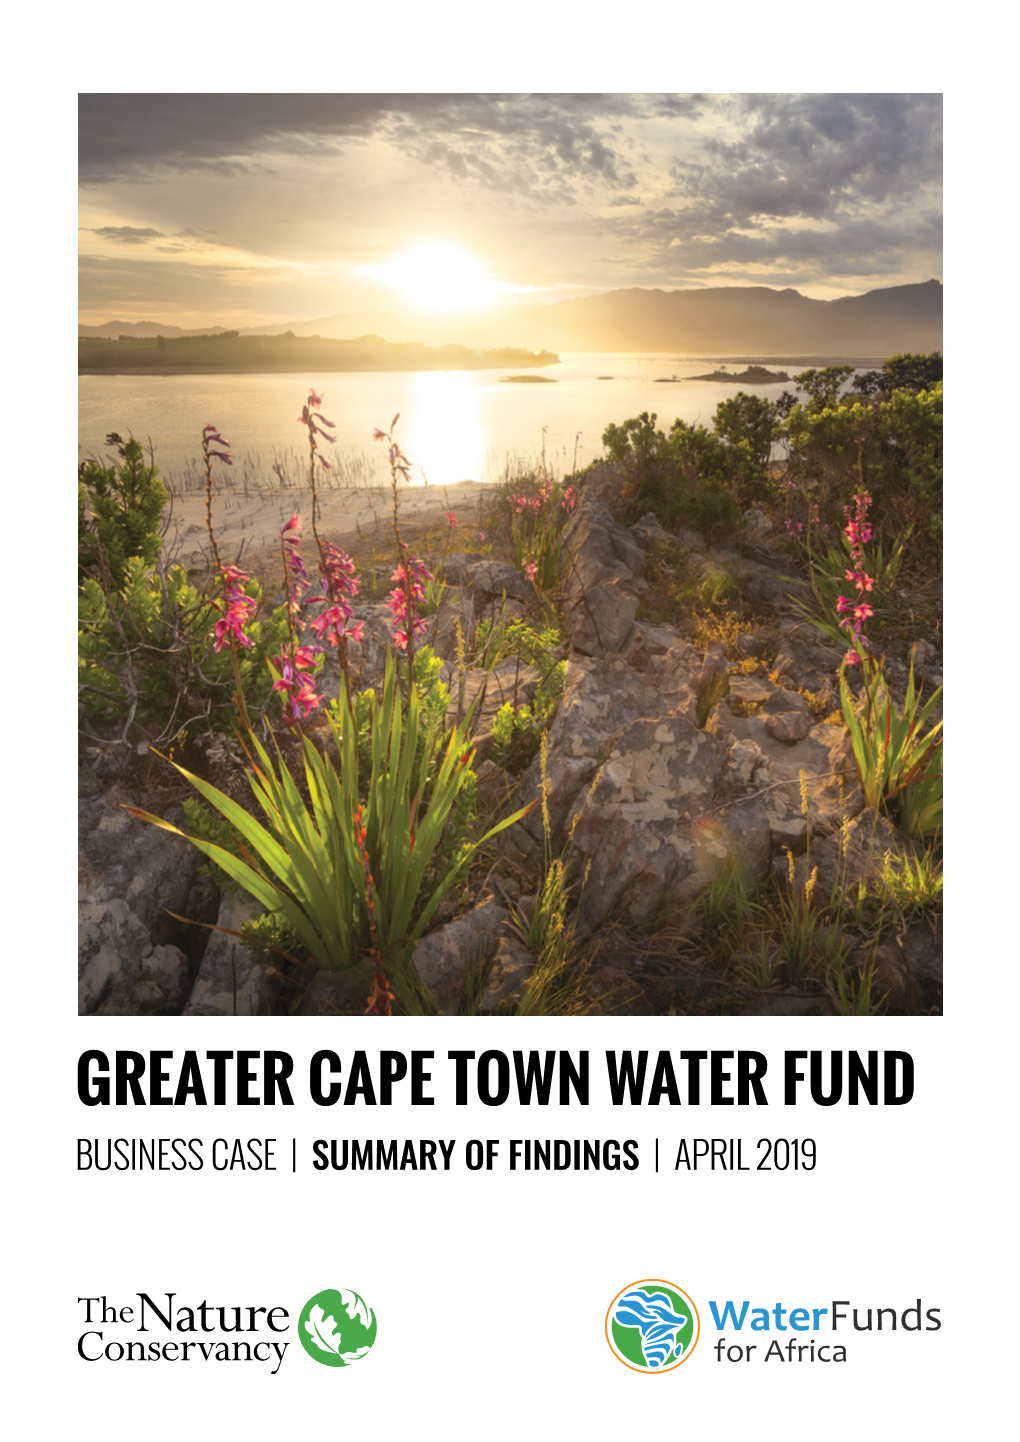 Greater Cape Town Water Fund Business Case | Summary of Findings | April 2019 Introduction